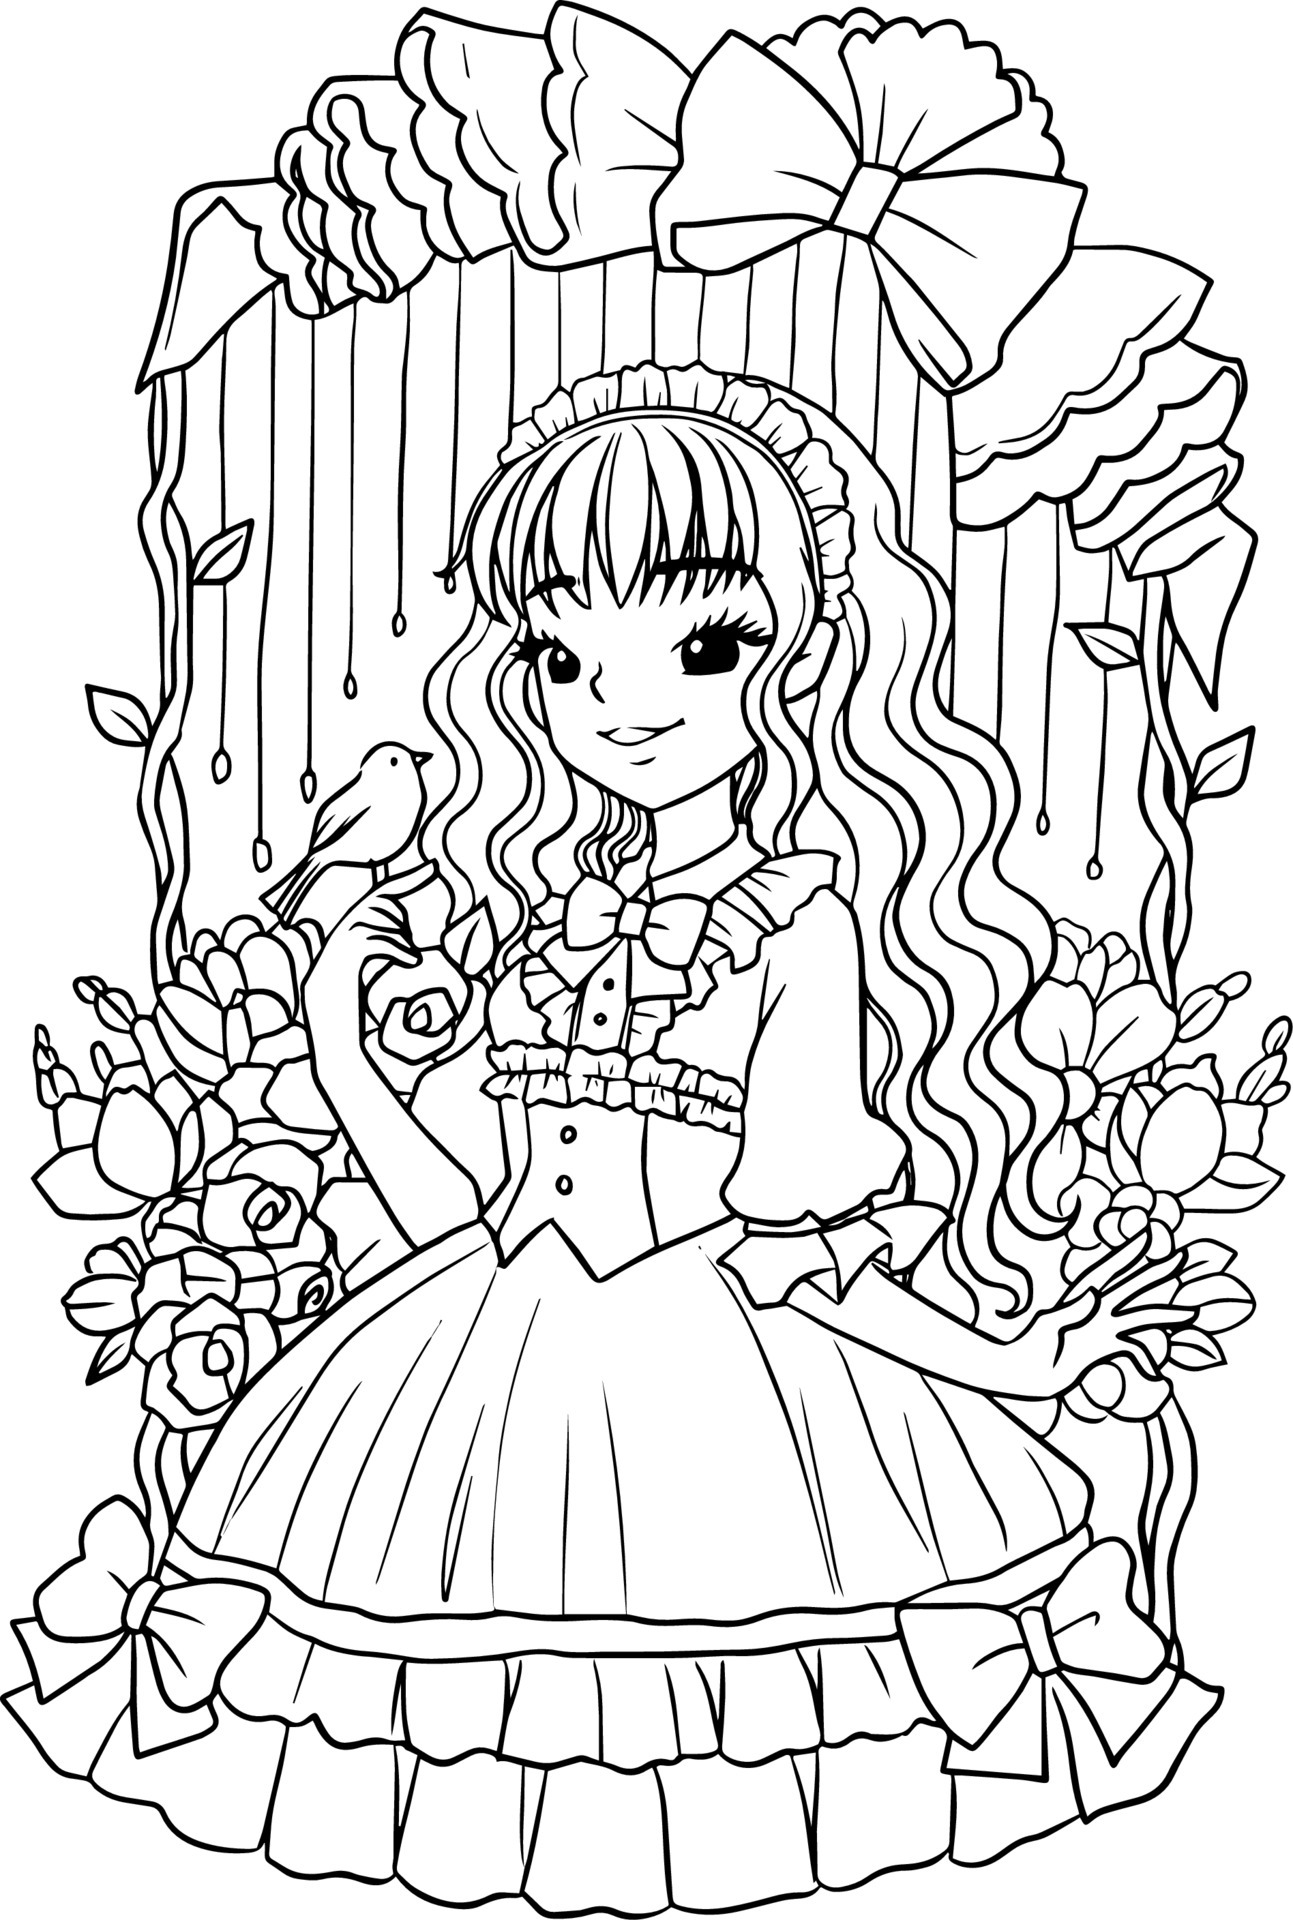 coloring page rose line art beautiful cartoon illustration clipart ...